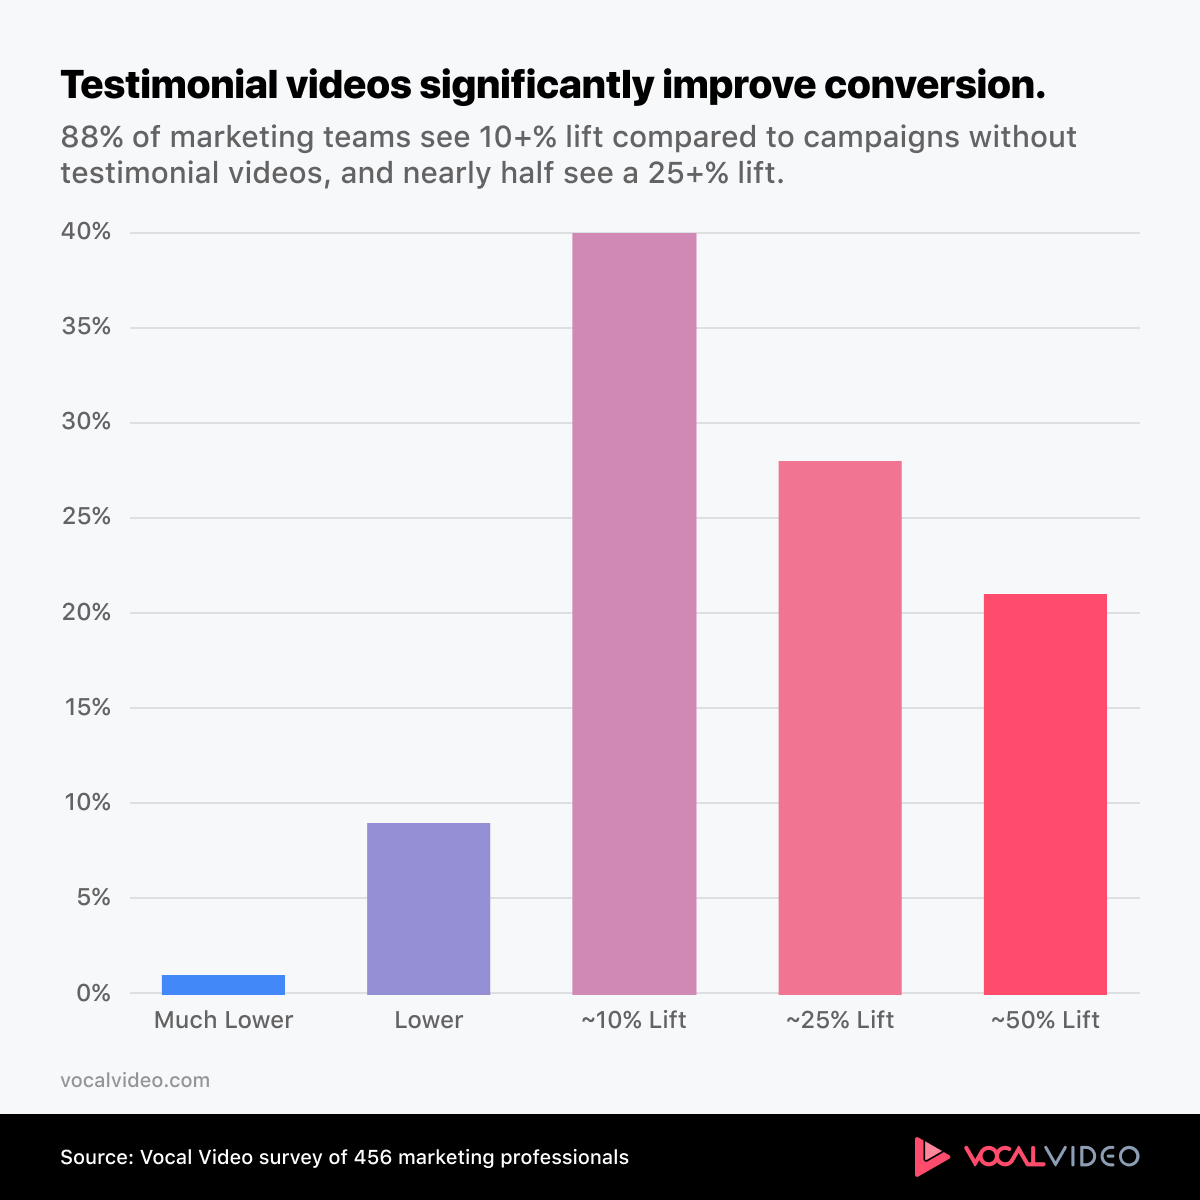 Data about Testimonial Marketing — the Value of Video Testimonials: Testimonial videos significantly improve conversions.